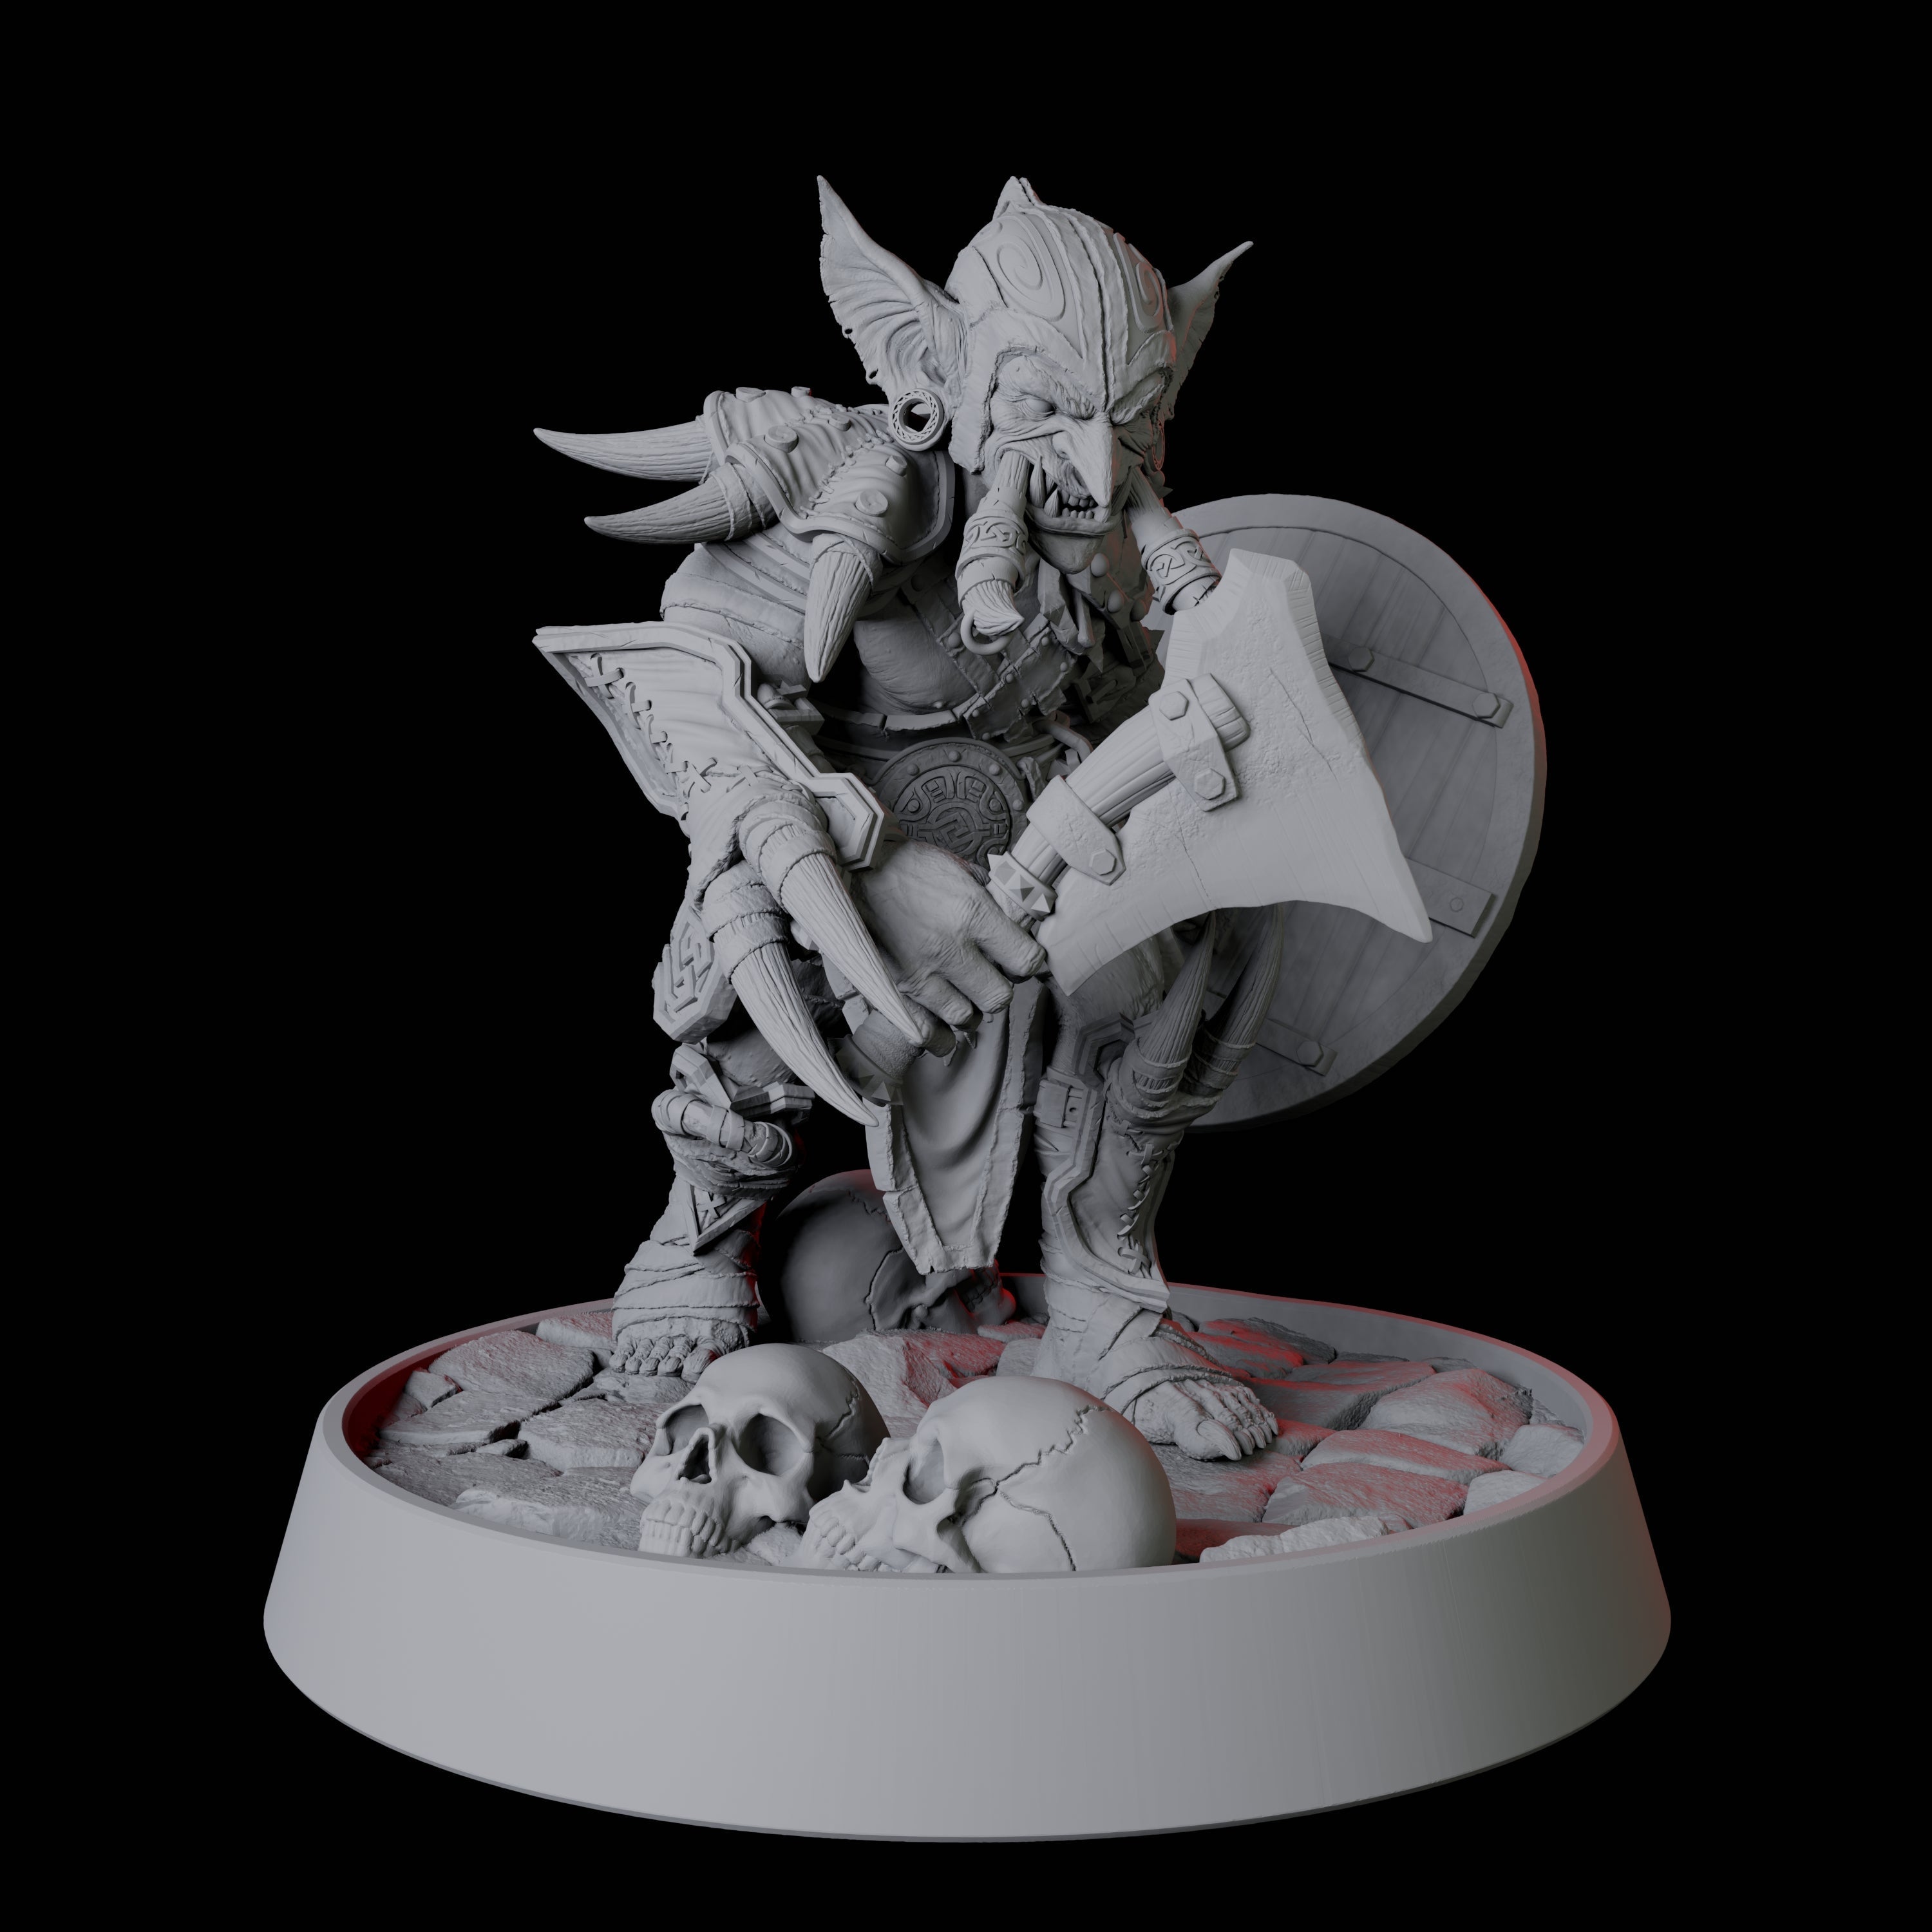 Armoured Tusked Goblin Miniature for Dungeons and Dragons